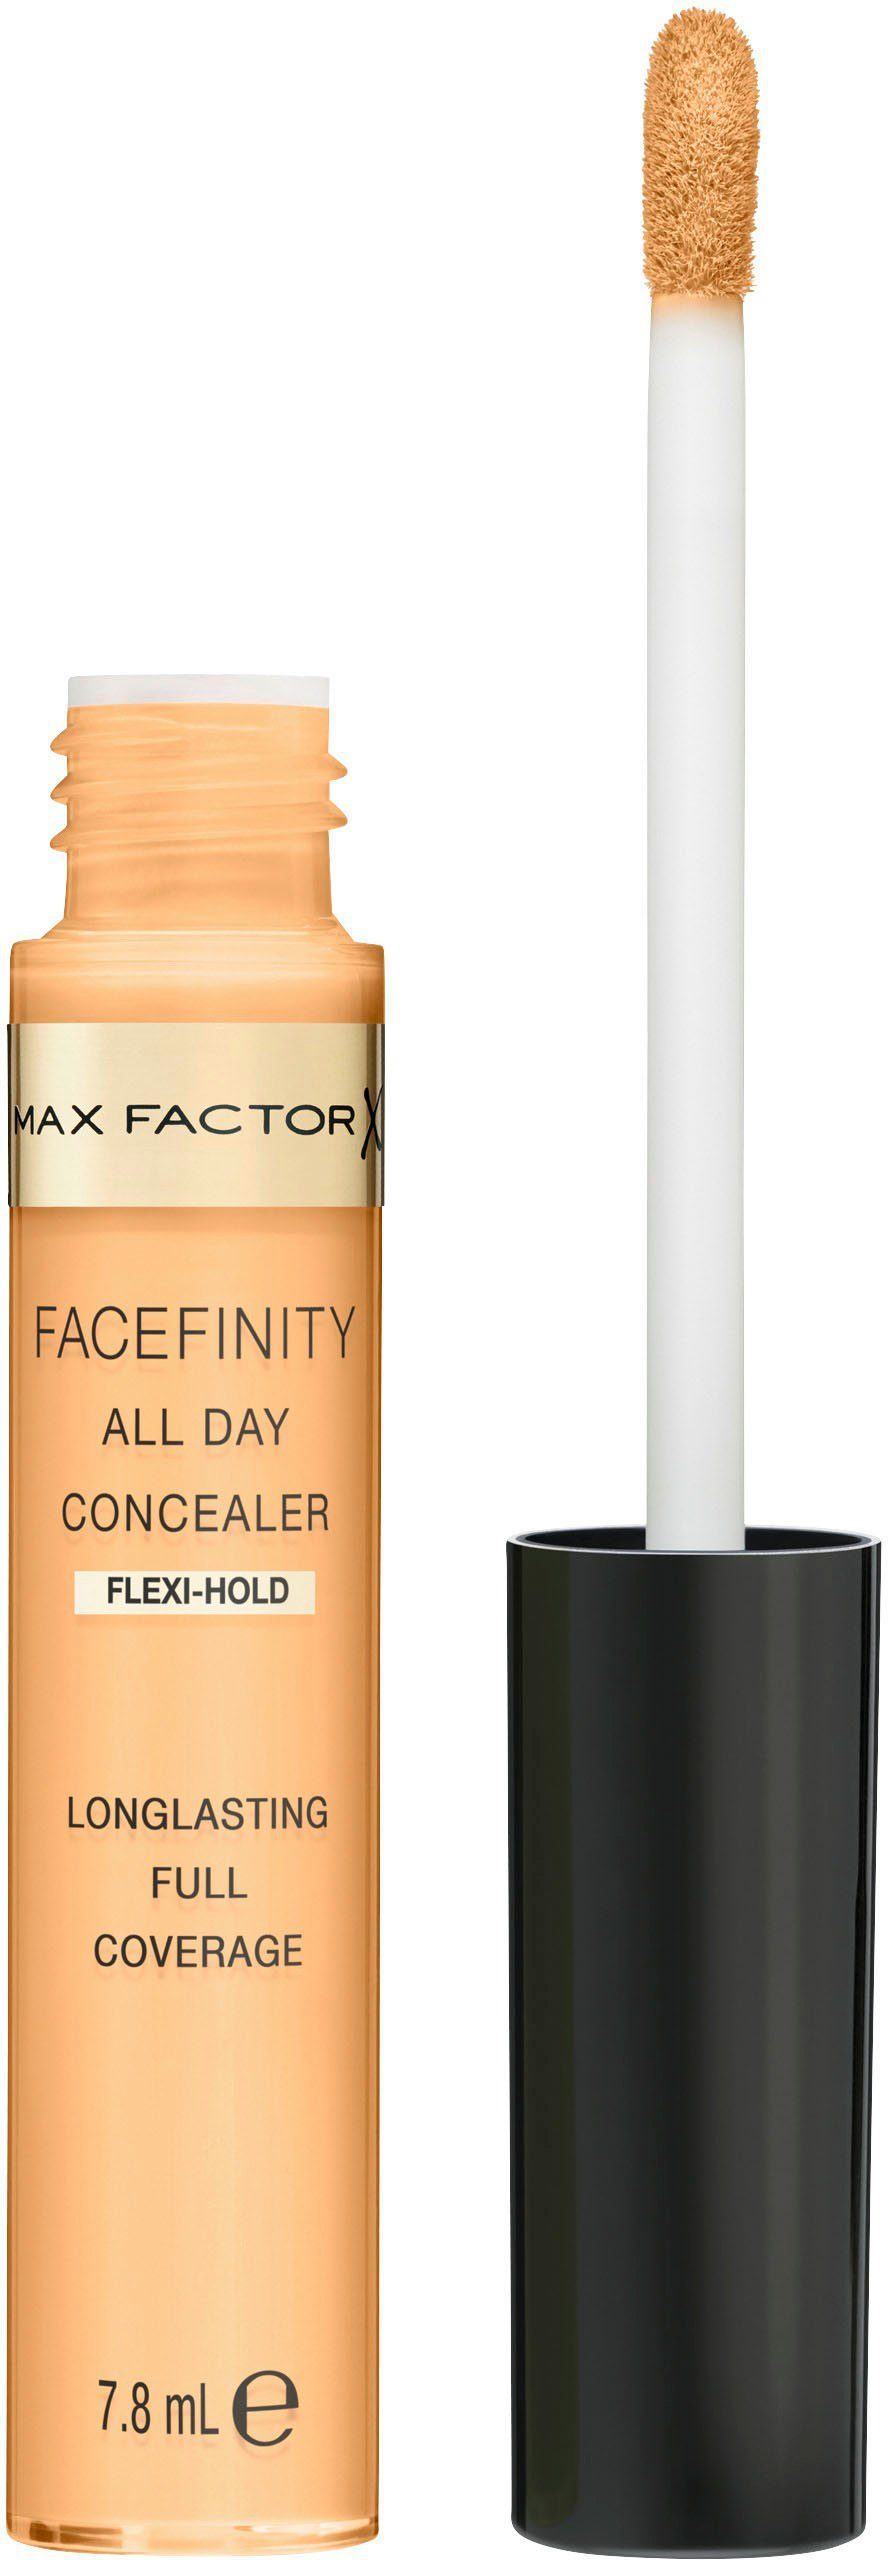 FACTOR MAX 40 FACEFINITY Day Concealer Flawless All